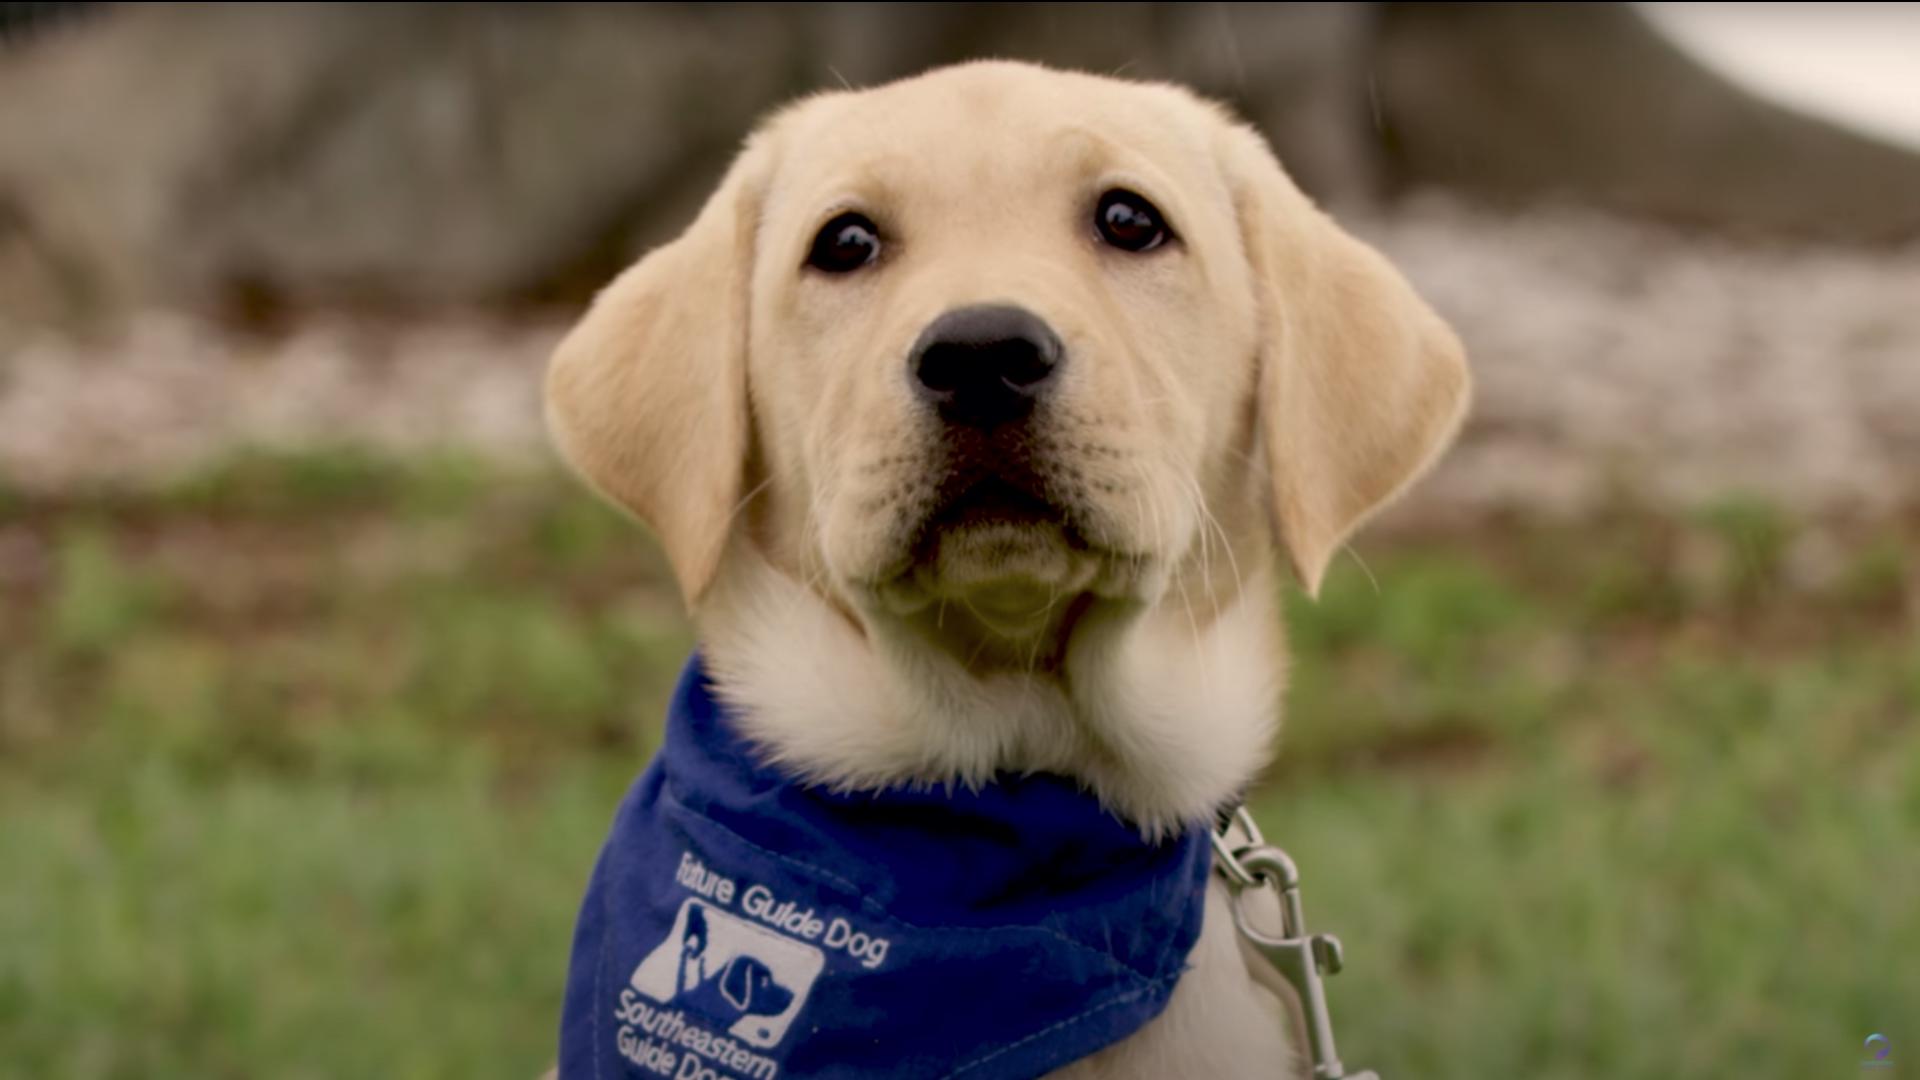 Yellow lab puppy sits and looks up and is wearing blue puppy bandana